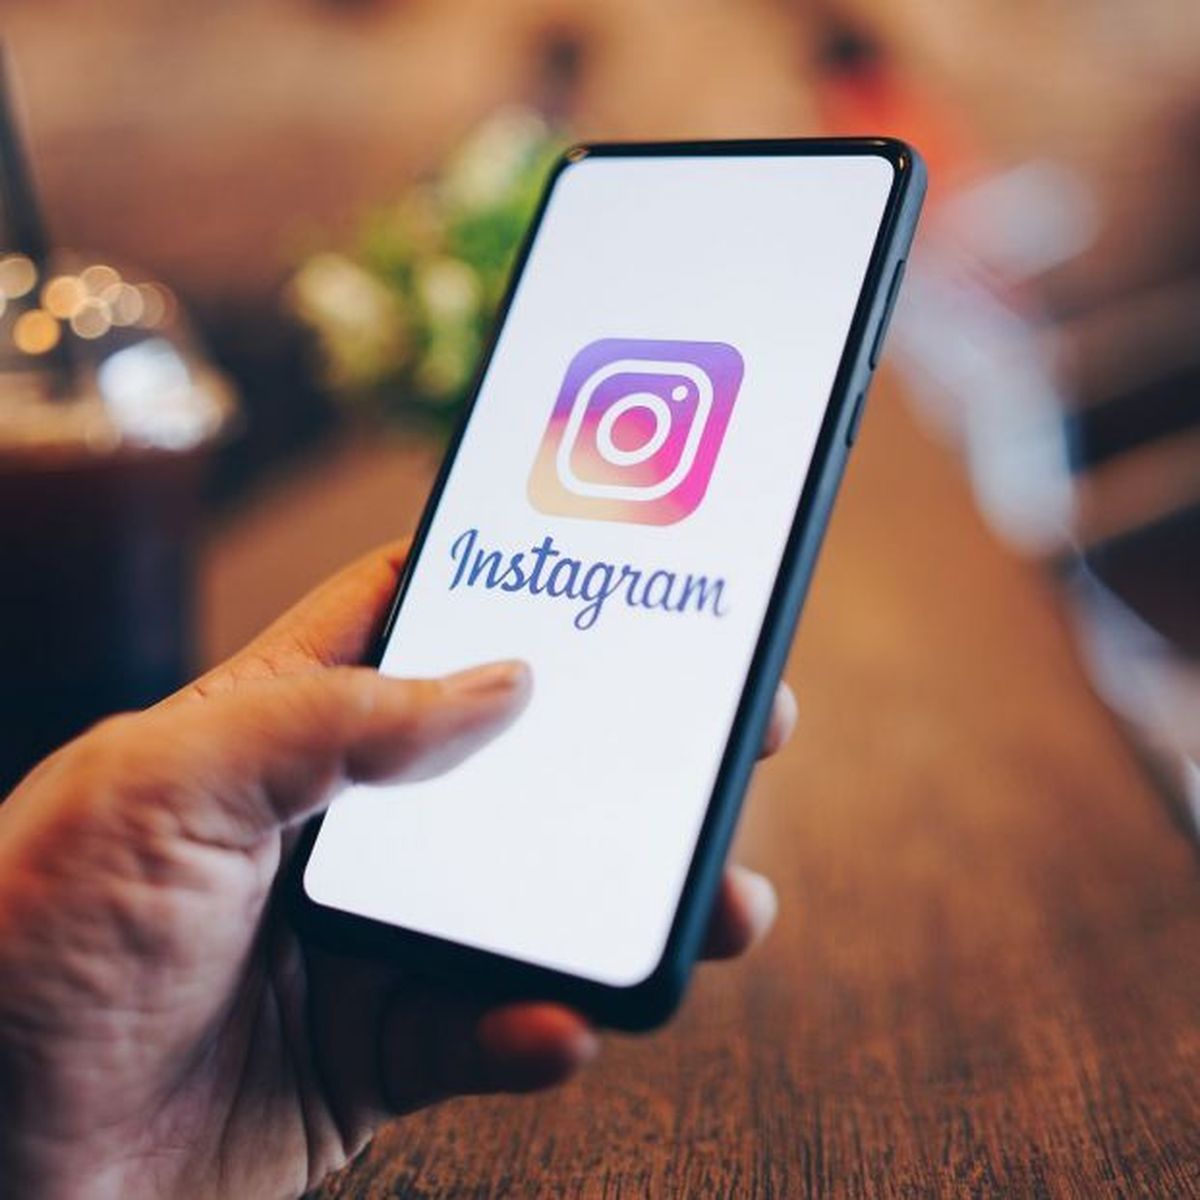 How to find your friends and contacts on Instagram?